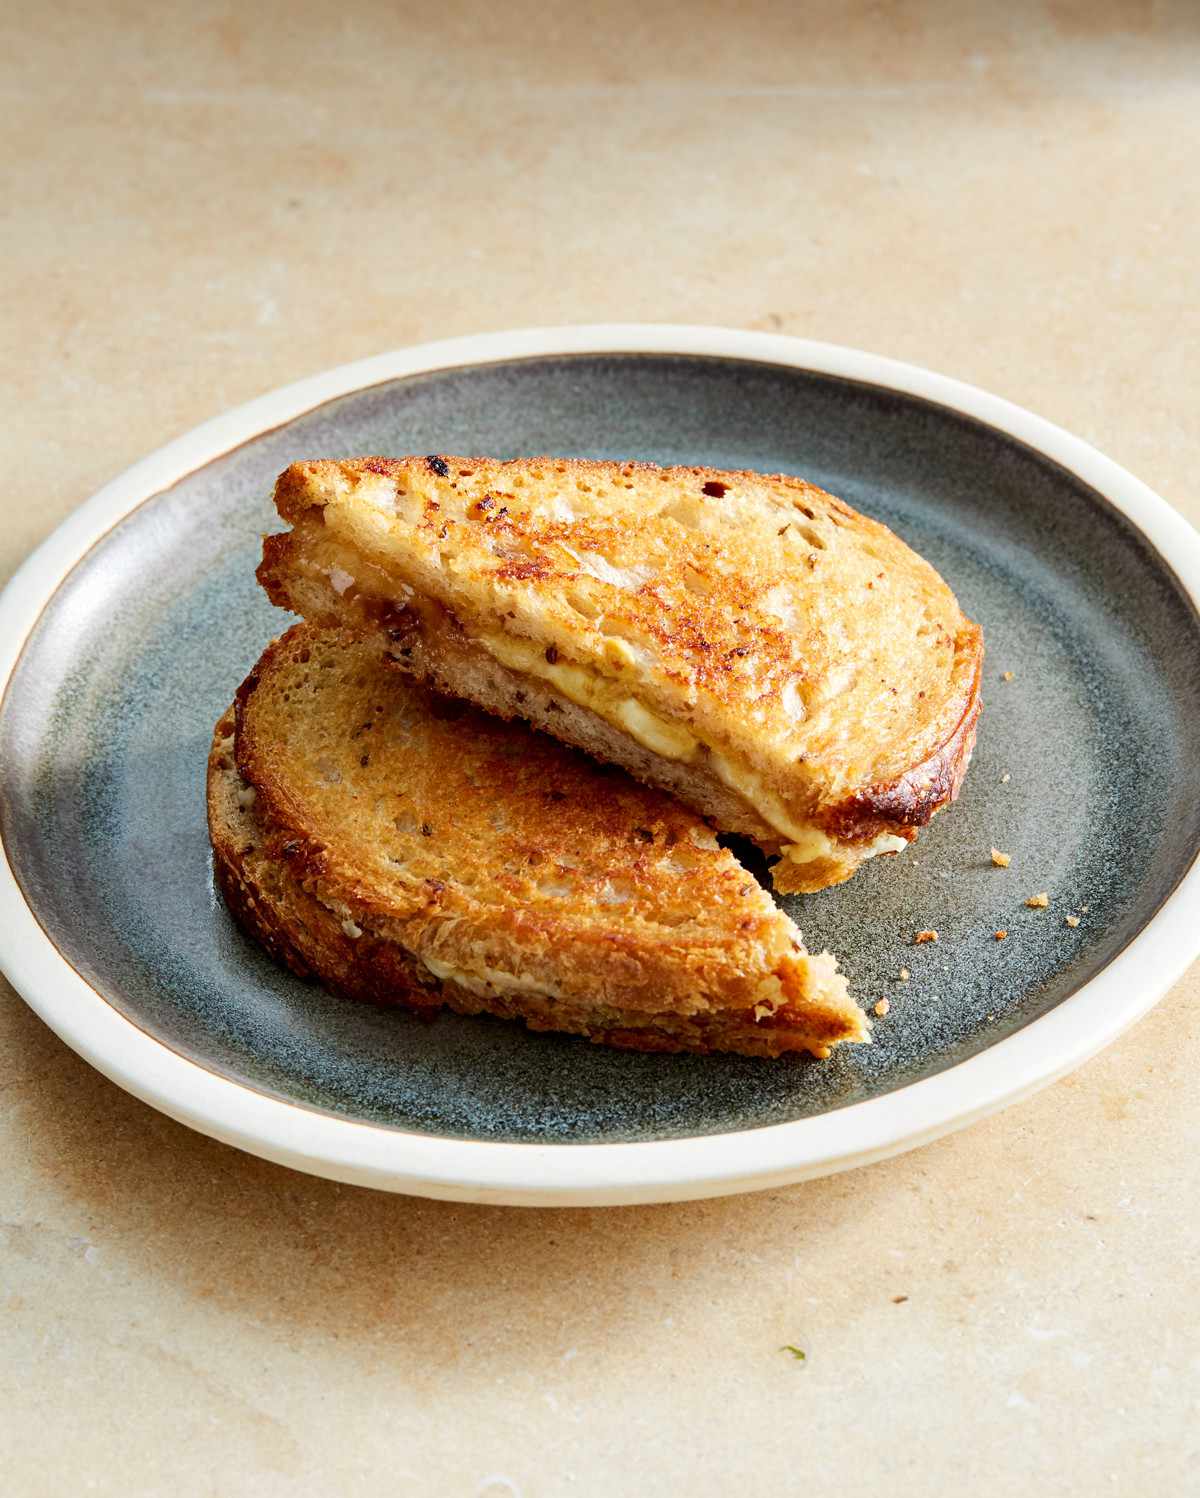 Grilled Gruyère Sandwich with Onion Jam